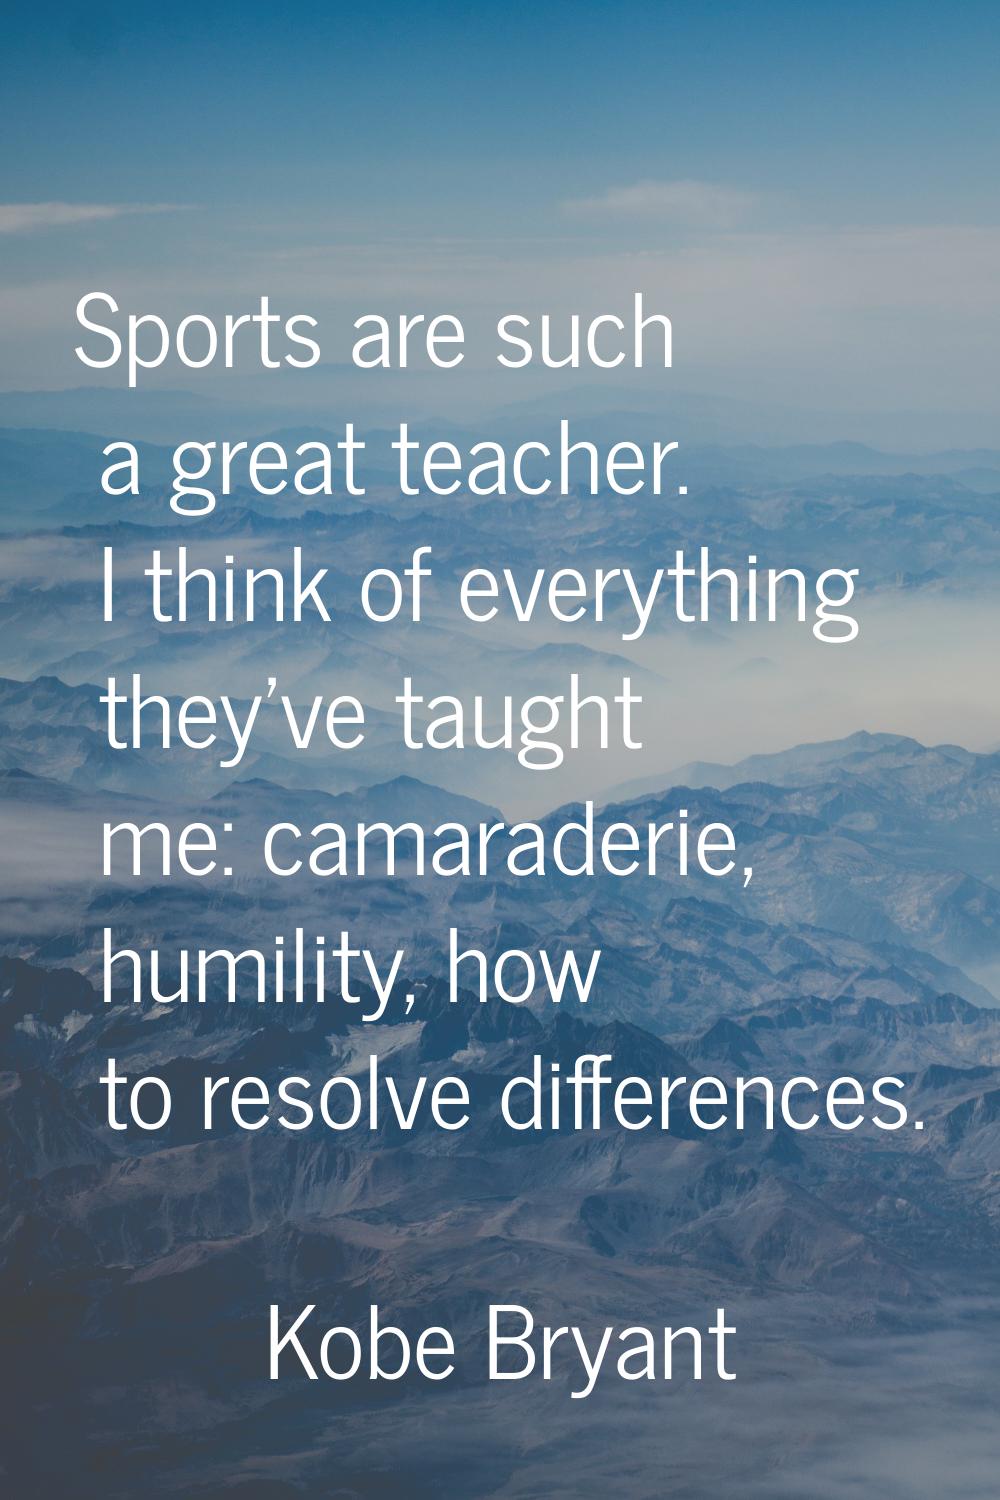 Sports are such a great teacher. I think of everything they've taught me: camaraderie, humility, ho